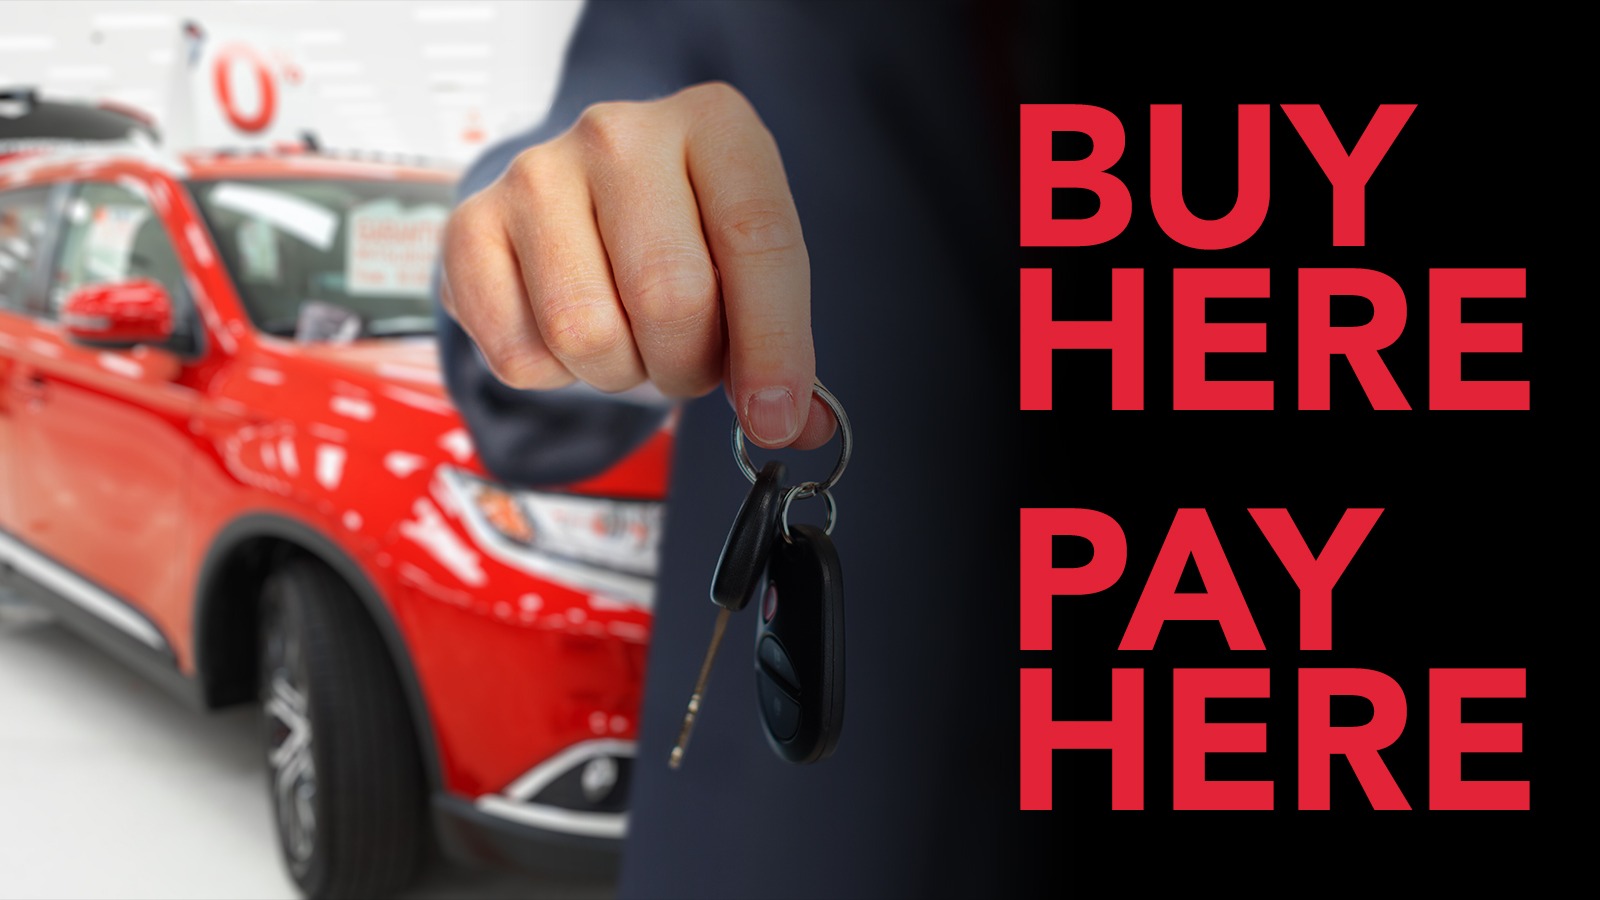 Buy Here Pay Here: Here Is Everything You Need To Know About The Car Loan Financier